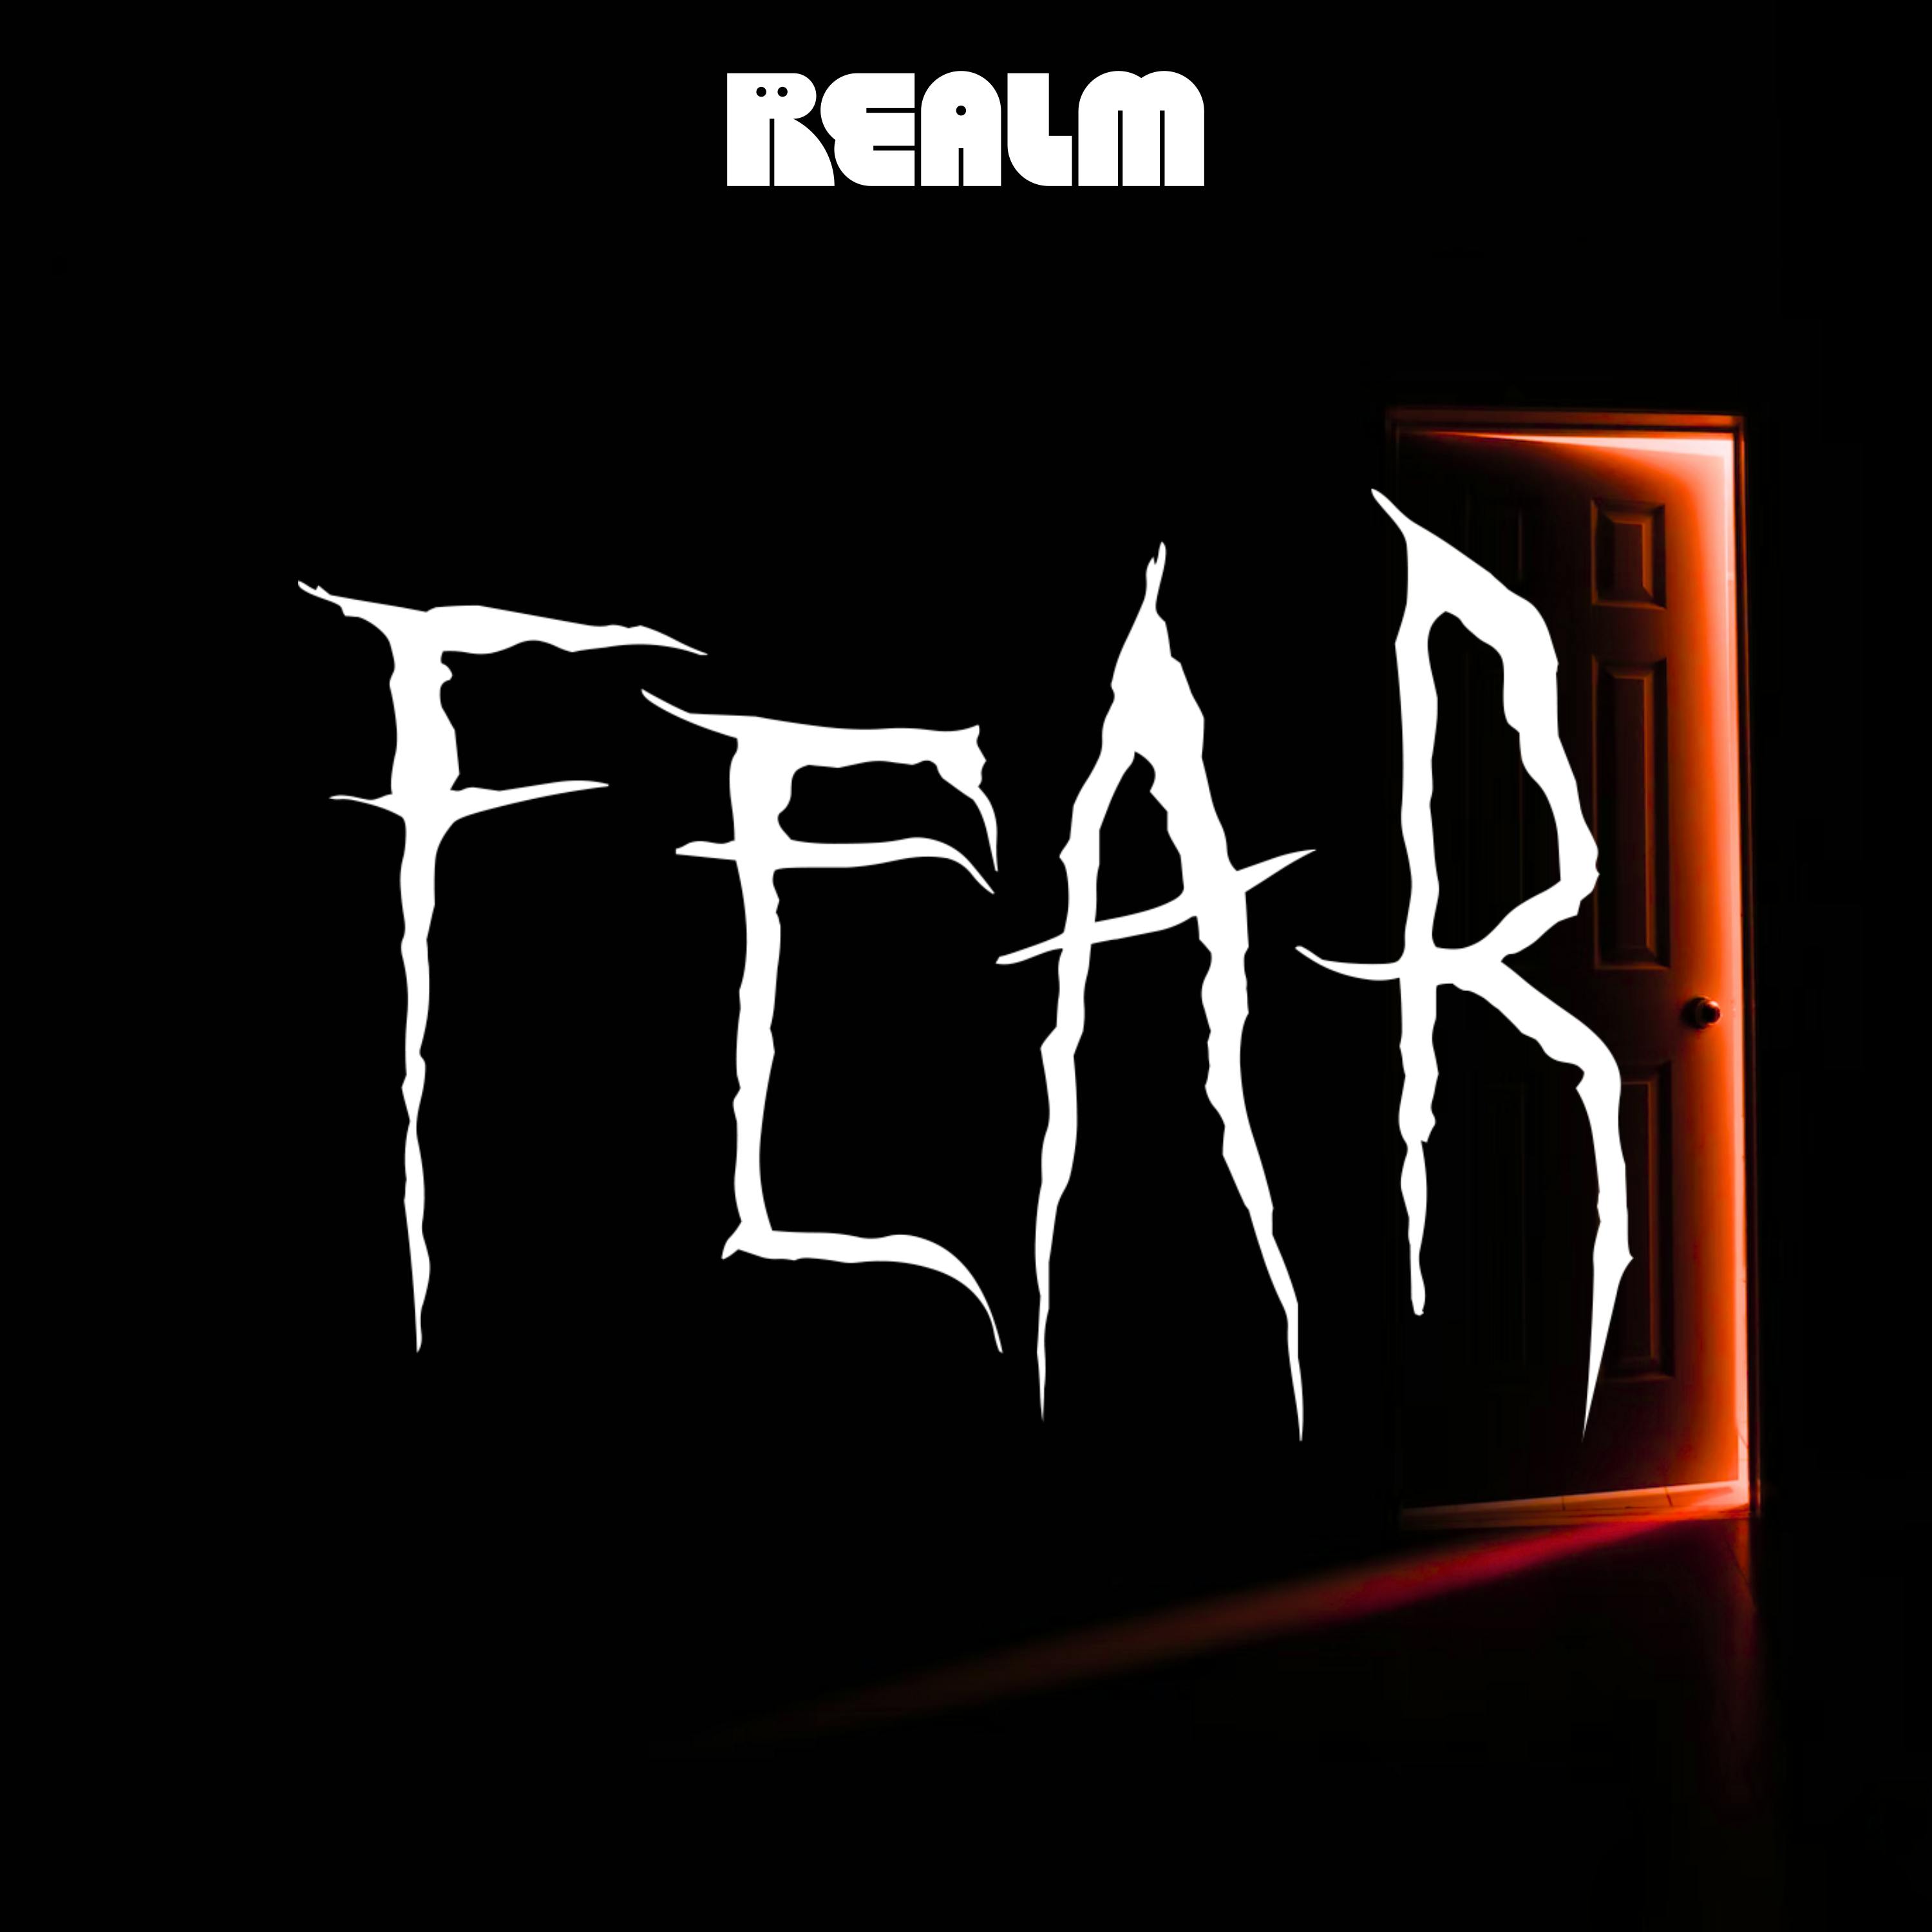 Welcome to Fear